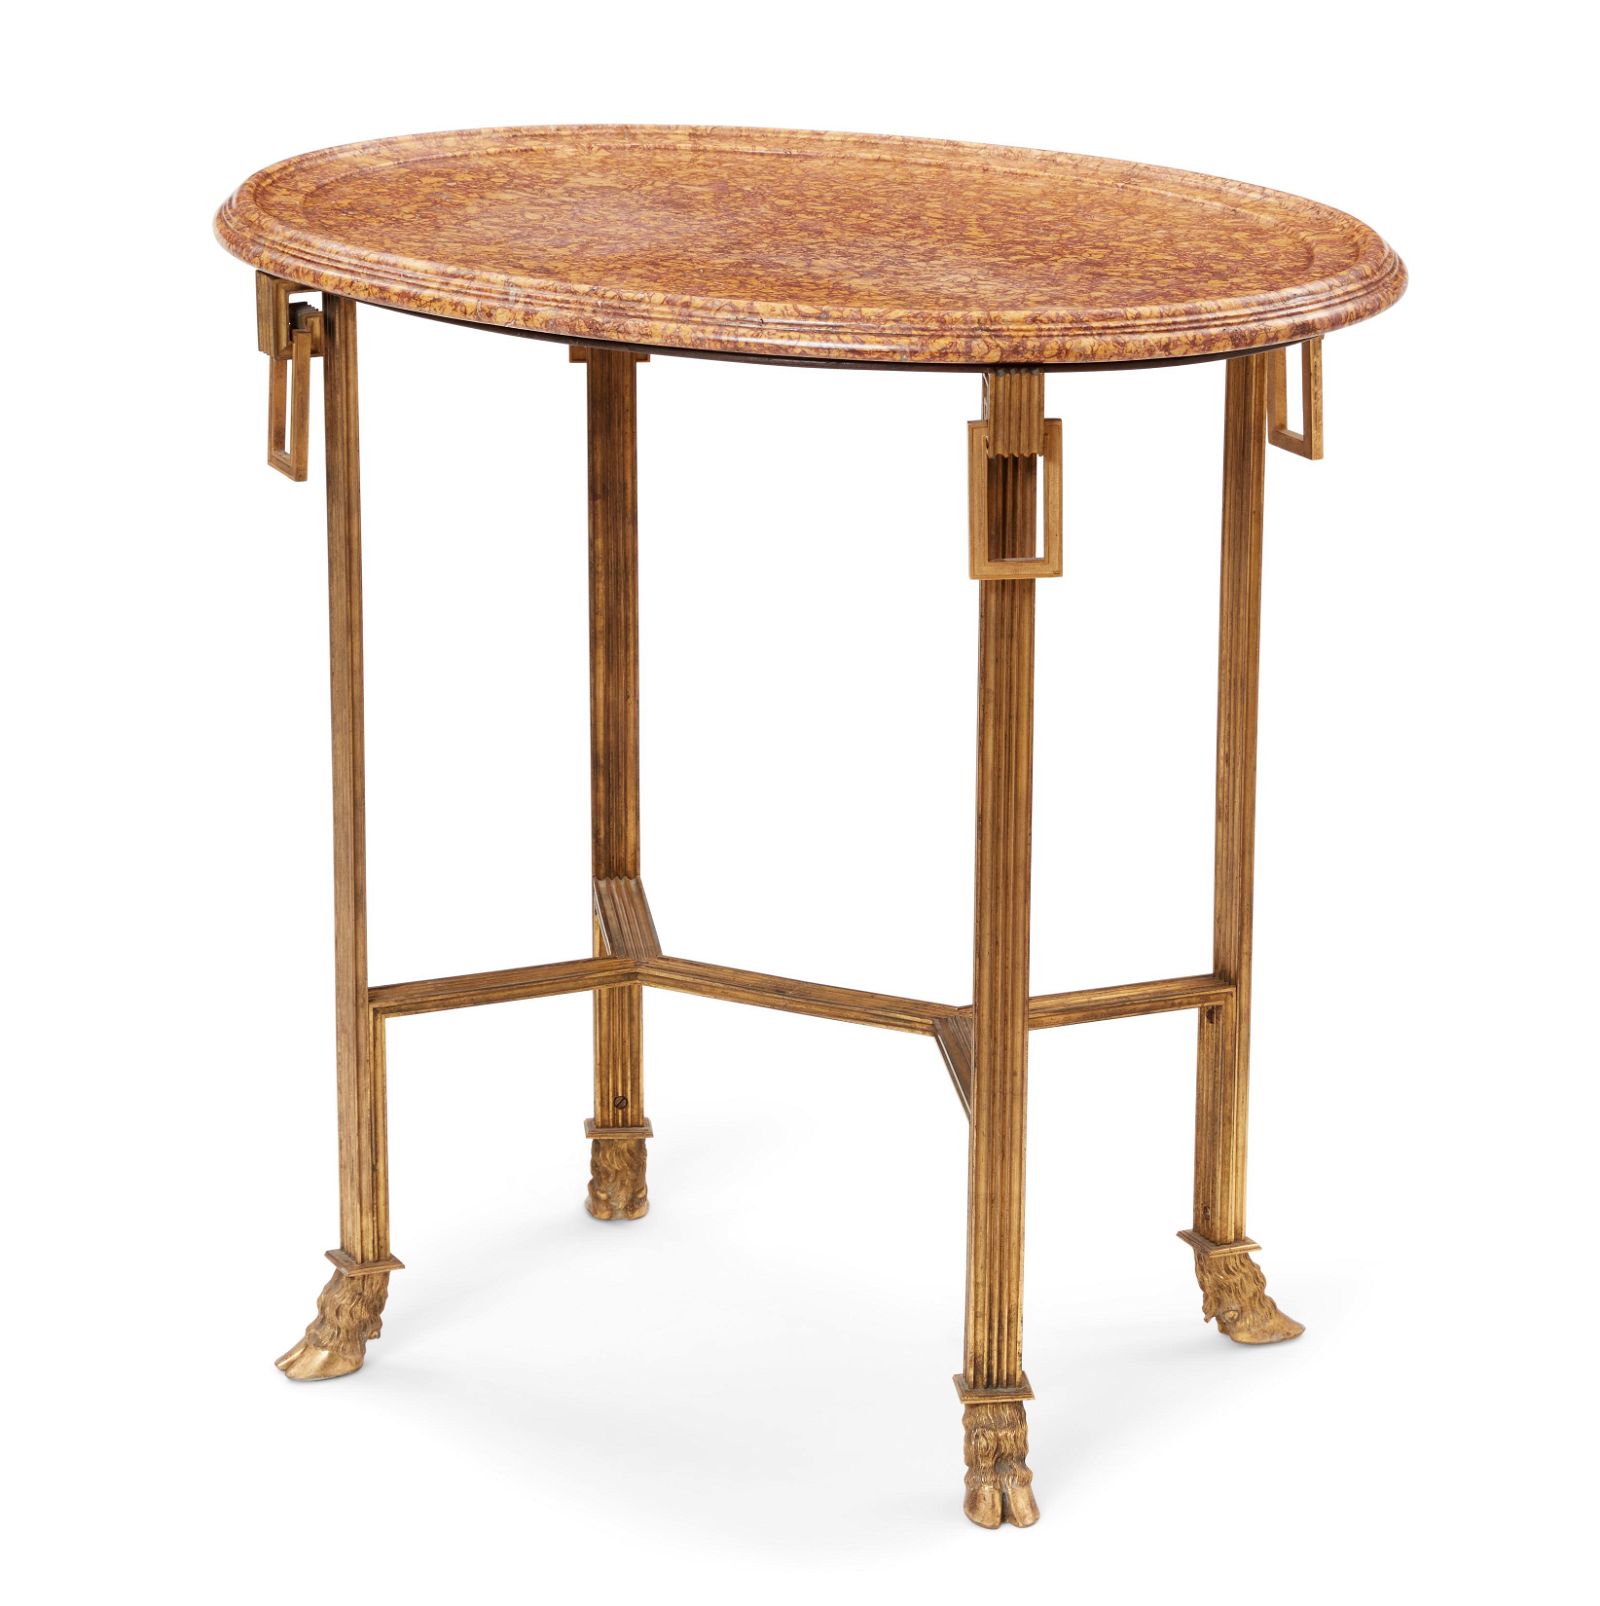 NEOCLASSICAL GILT BRONZE OVAL TABLE  2fb266f